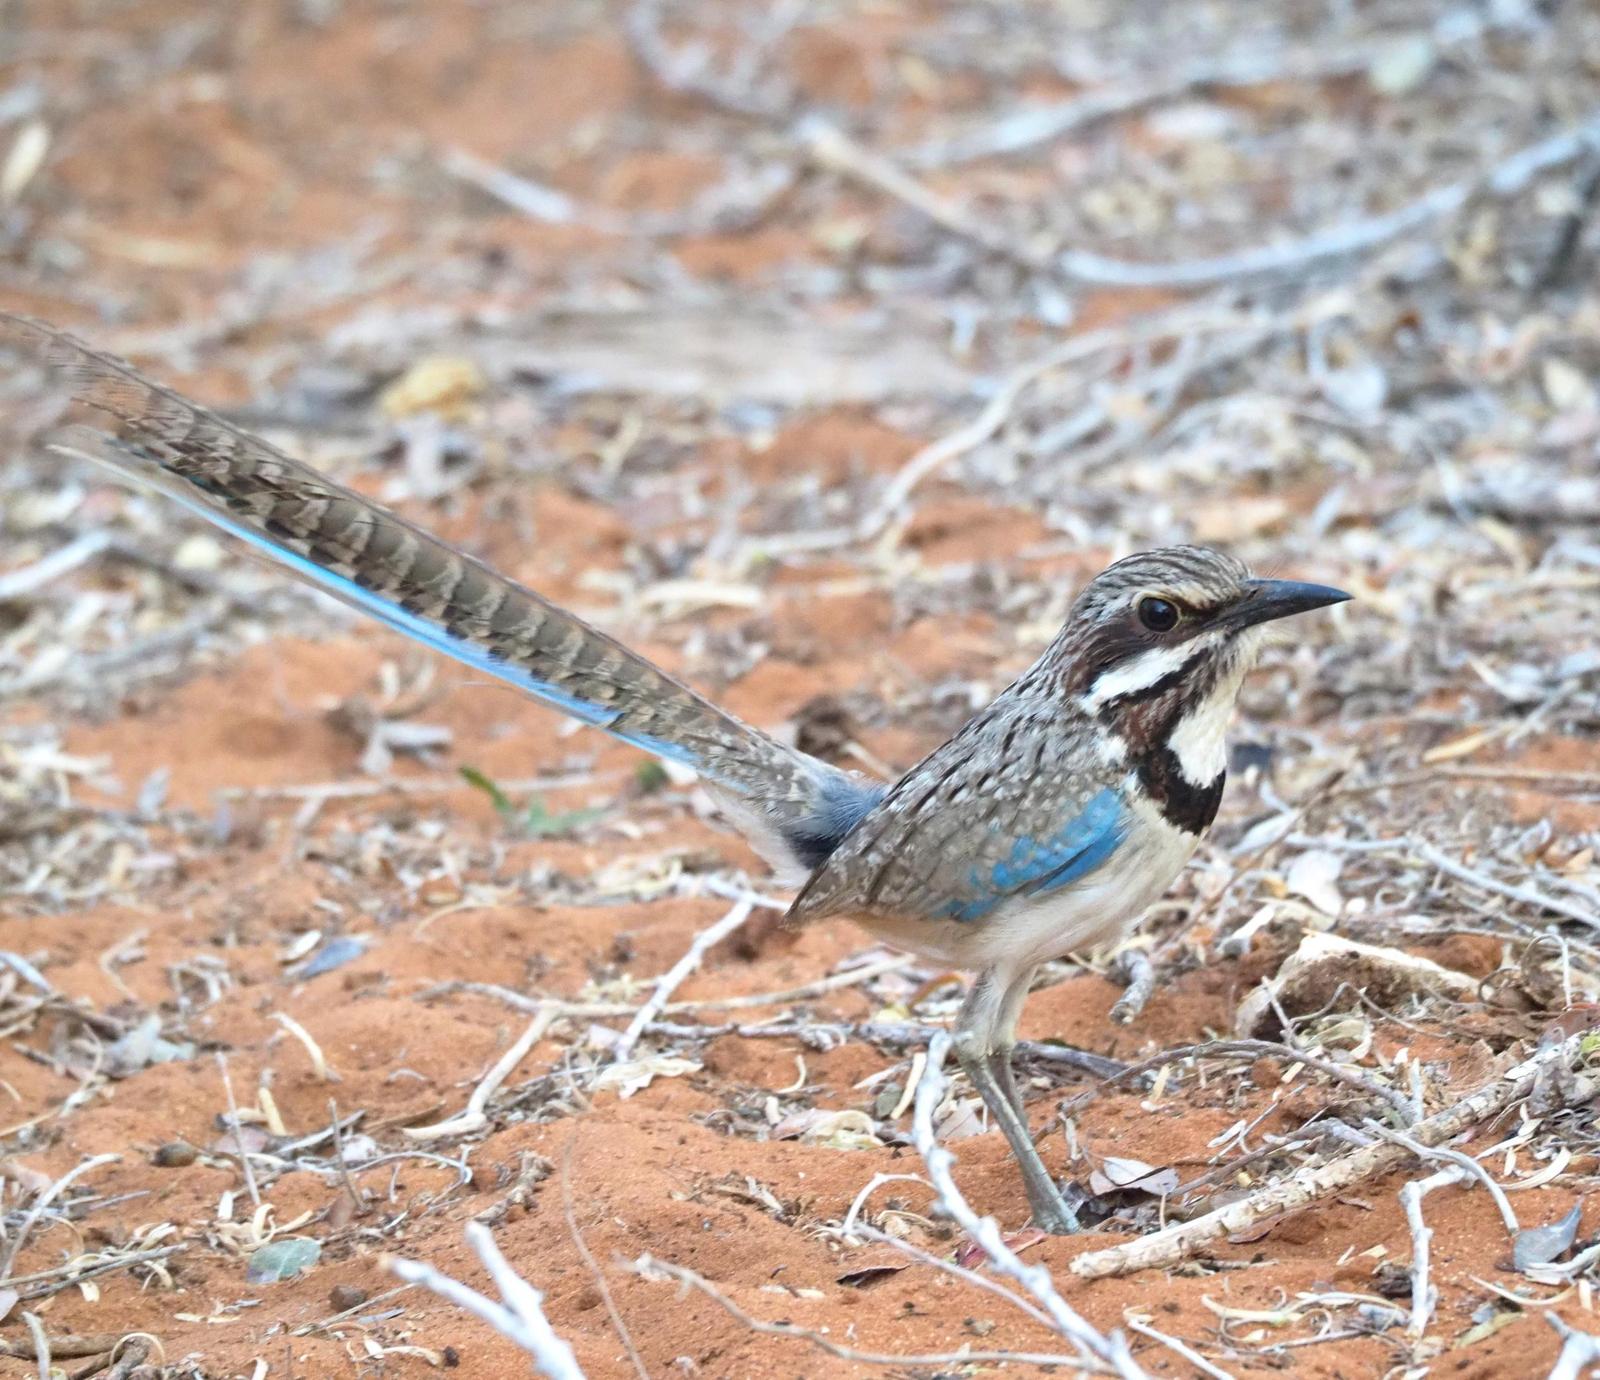 Long-tailed Ground-Roller Photo by Kristin Vigander